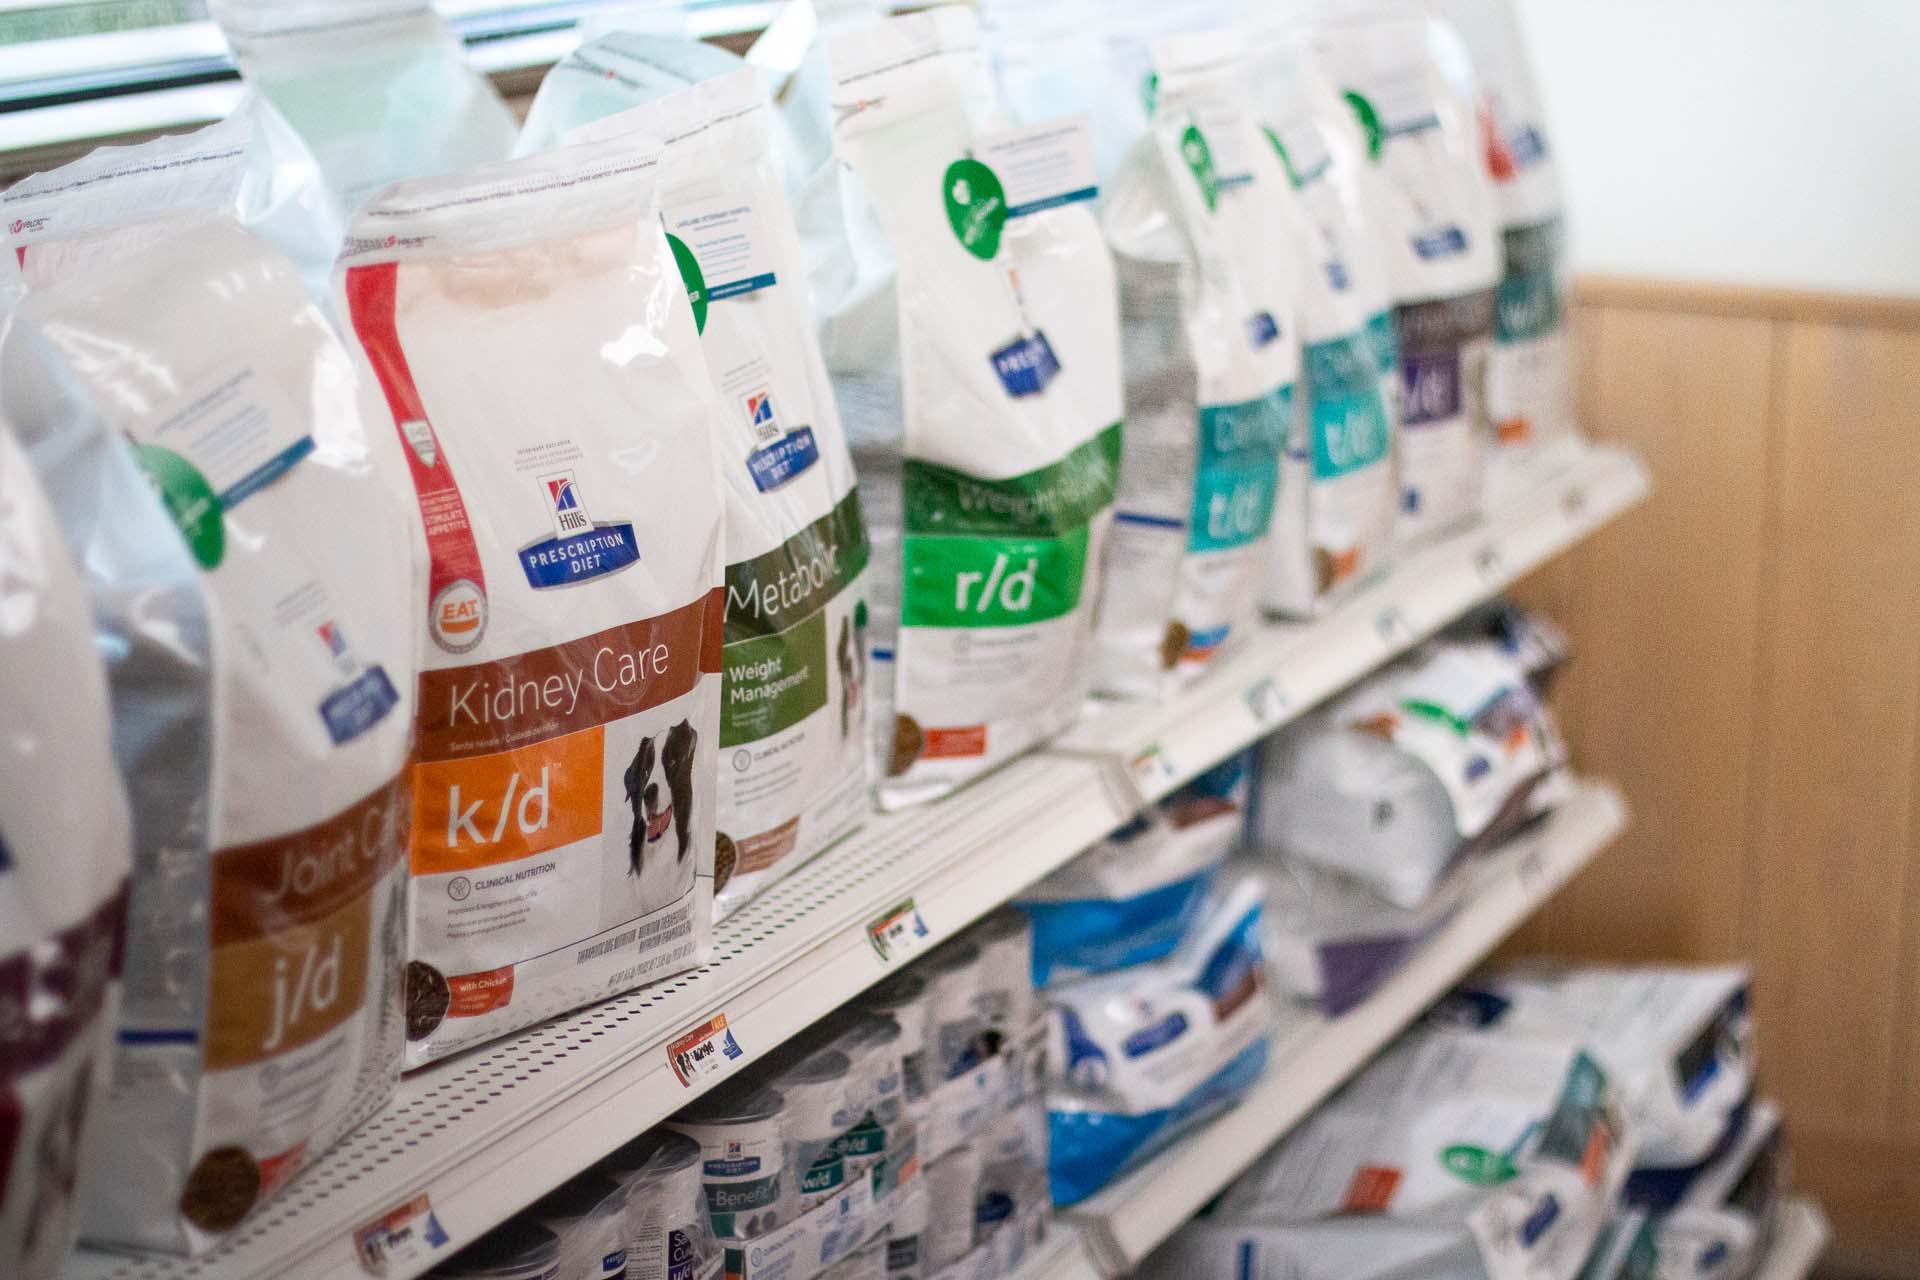 We carry a variety of pet foods and products that can conveniently be purchased in-house.